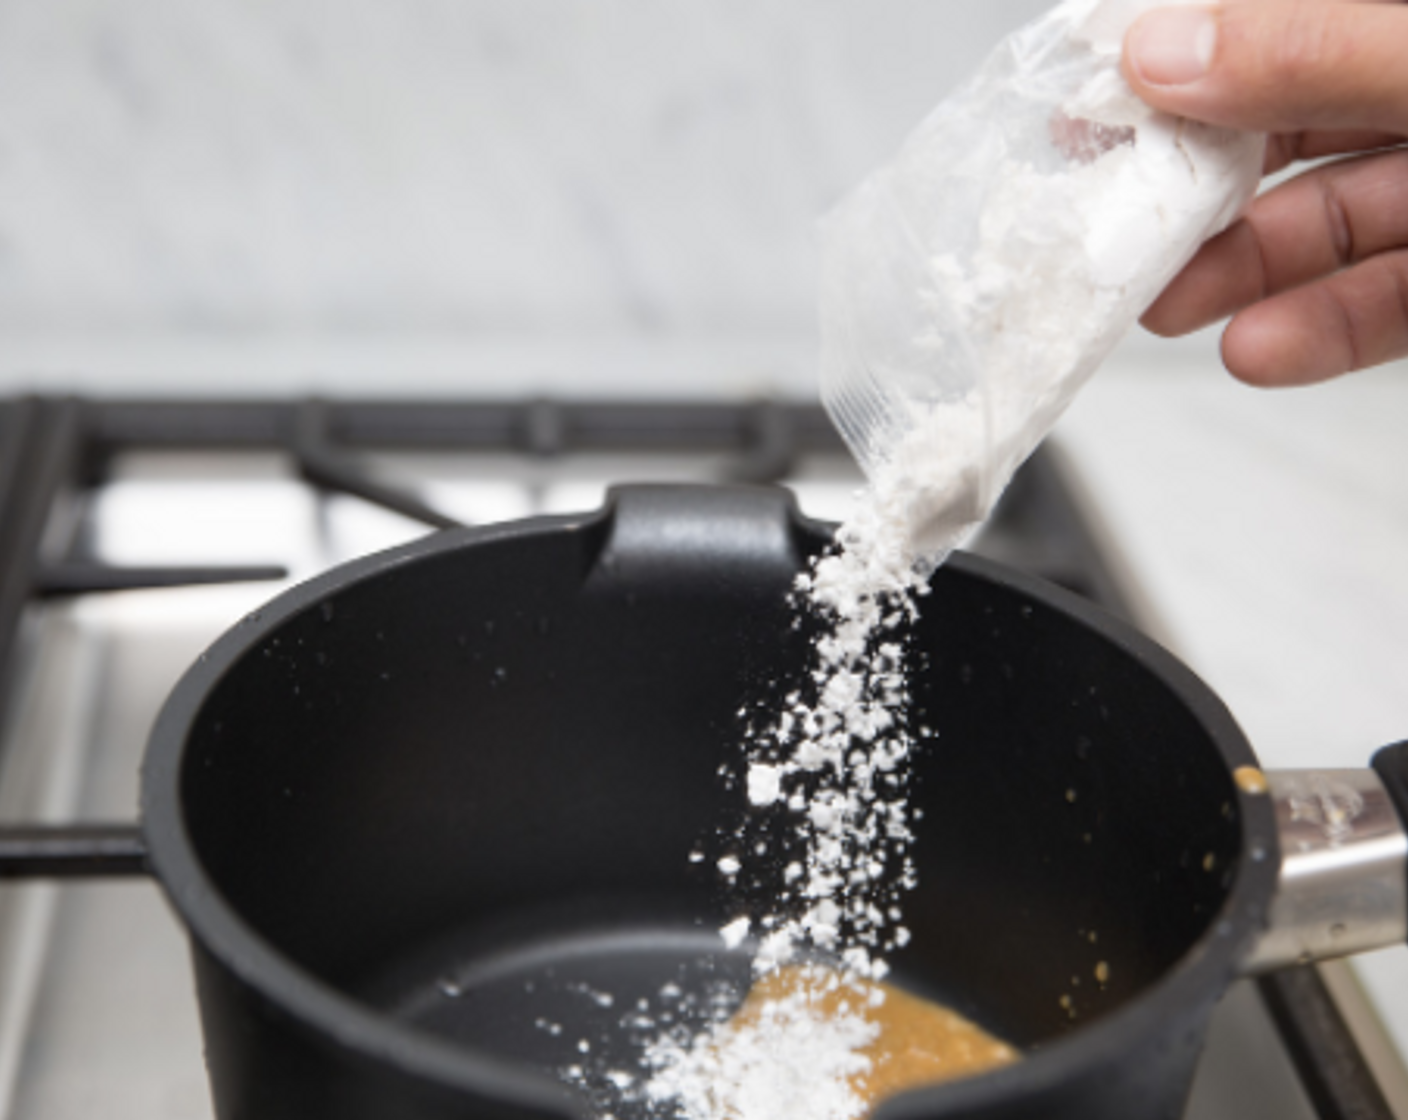 step 11 Transfer all drippings from meatloaves to a small saucepot, and add remaining Cooking Oil (1/2 Tbsp). Whisk in flour to thoroughly combine. Place over medium heat, and cook while whisking until the All-Purpose Flour (1/2 Tbsp) smells faintly nutty, 1-2 minutes.